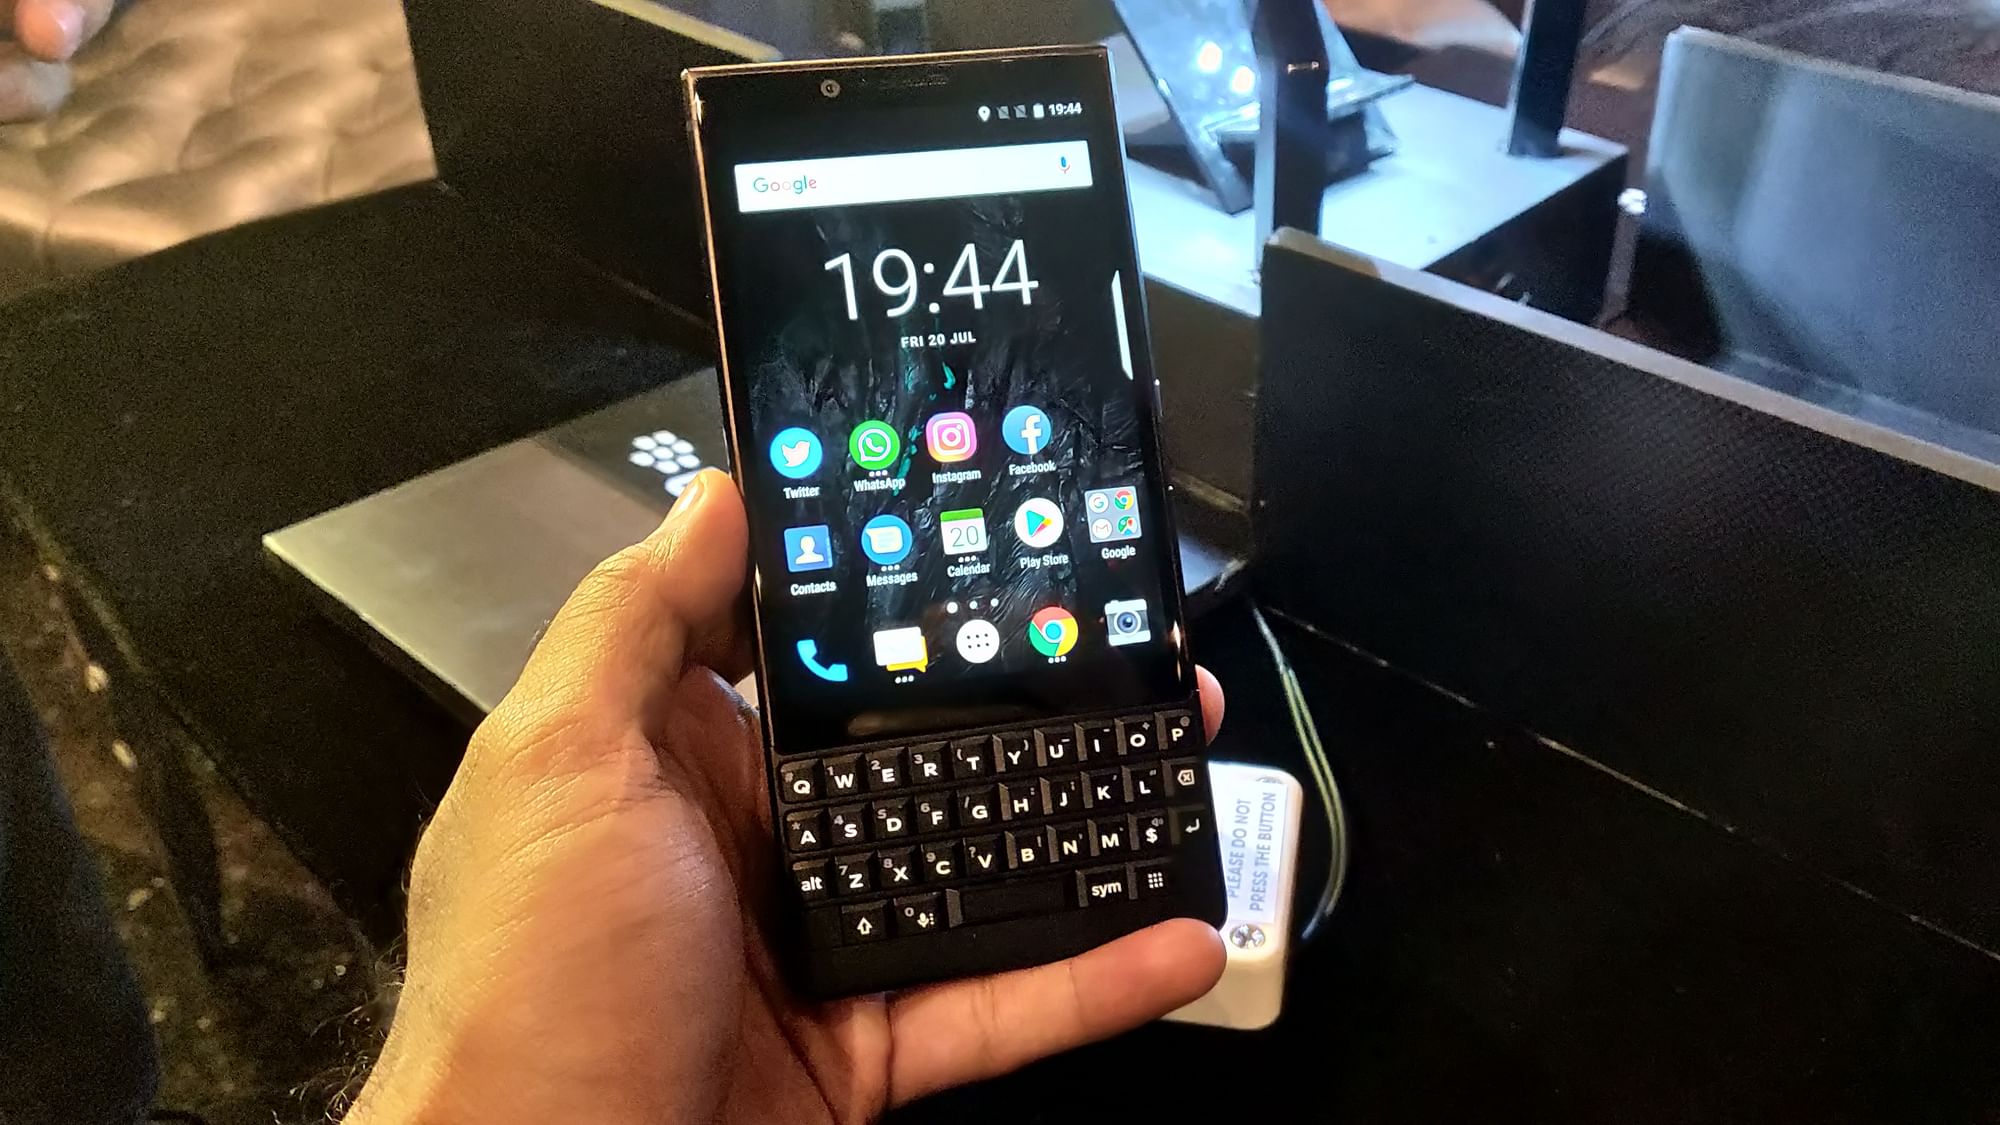 The BlackBerry Key2 was launched in 2018.